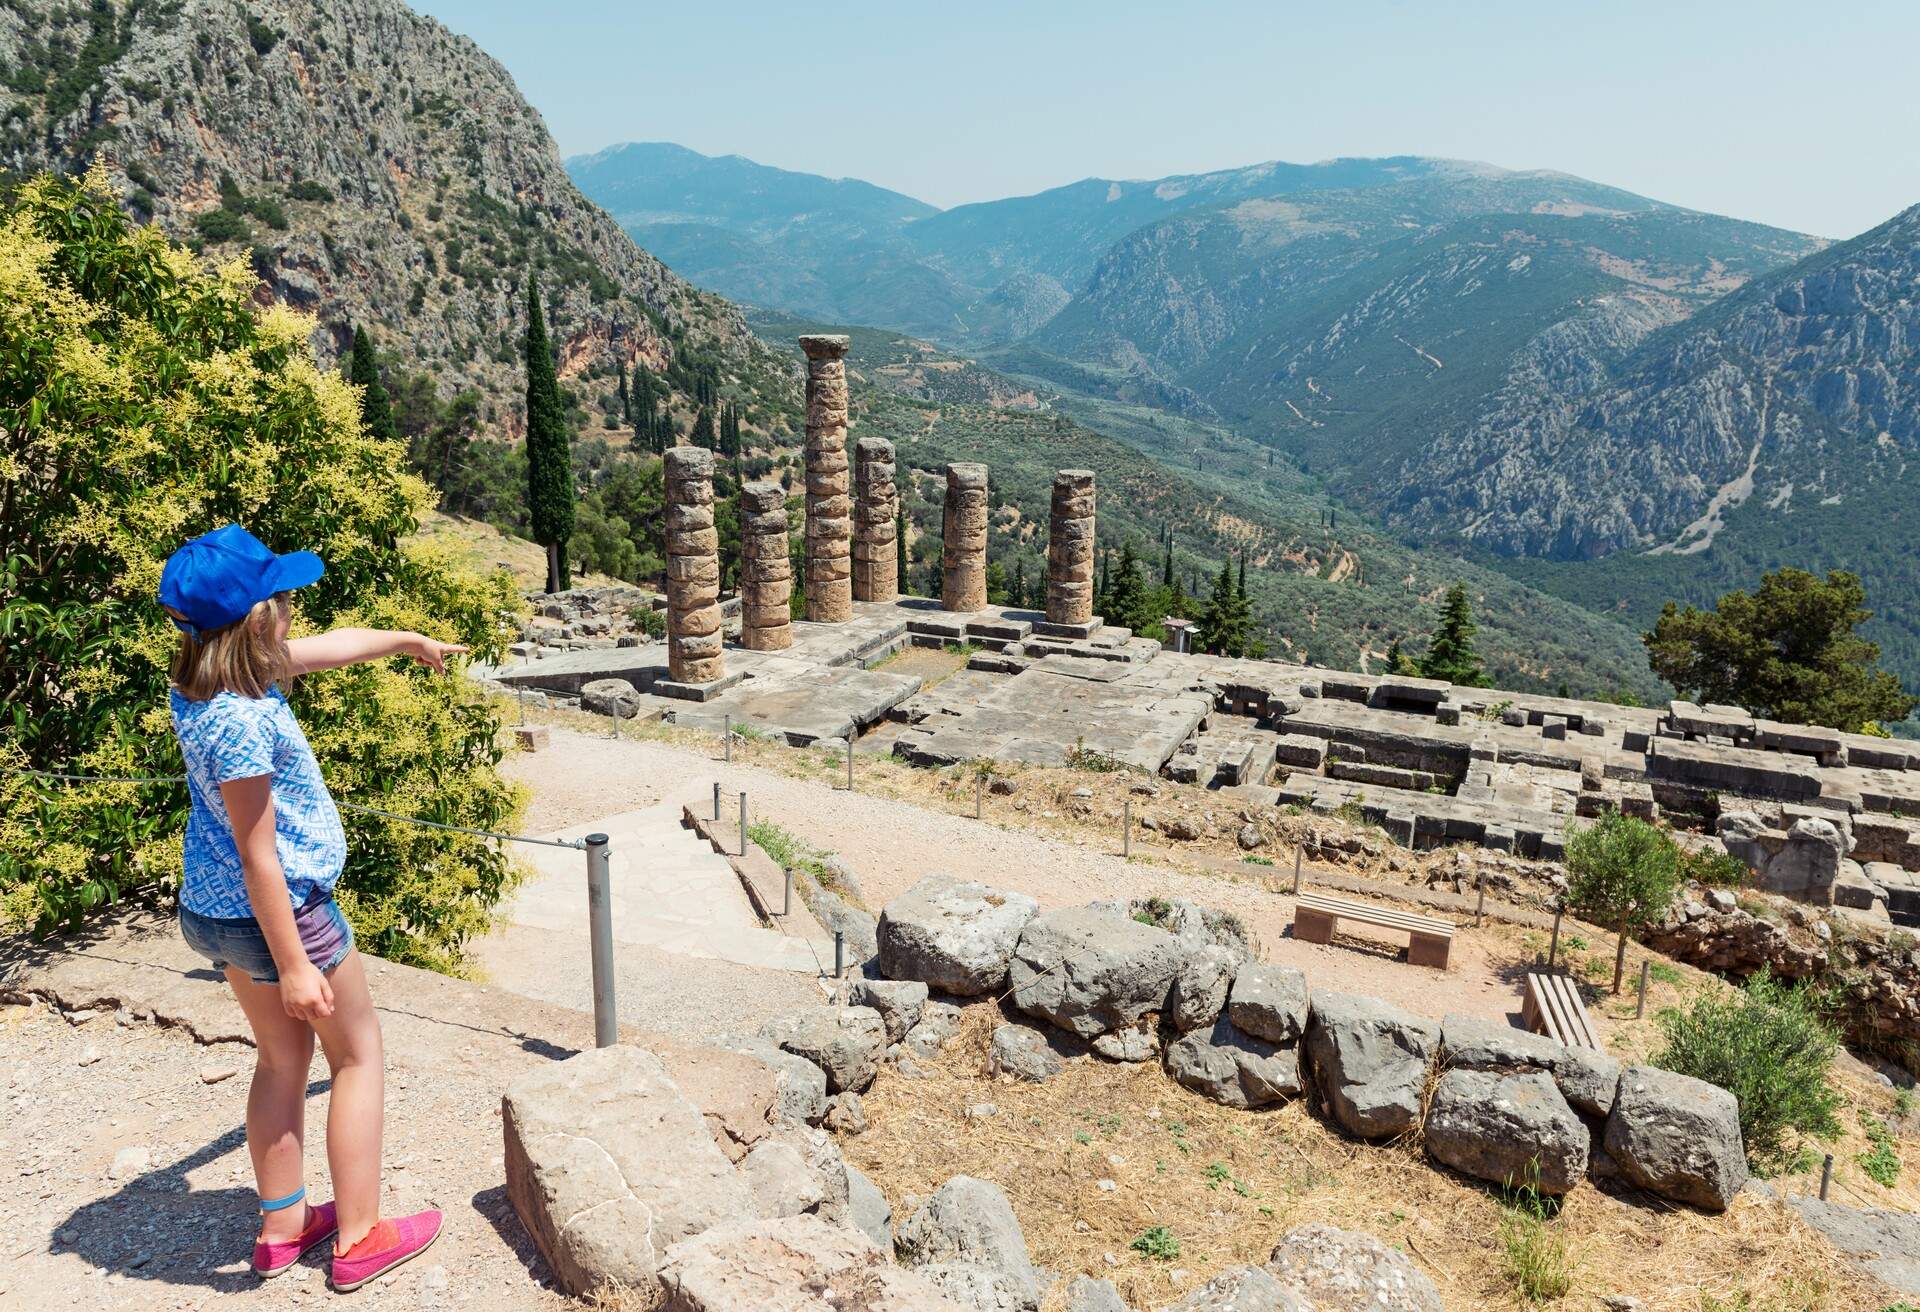 The ruins of the Temple of Apollo, a temple of the Doric order, at Delphi in Central Greece.